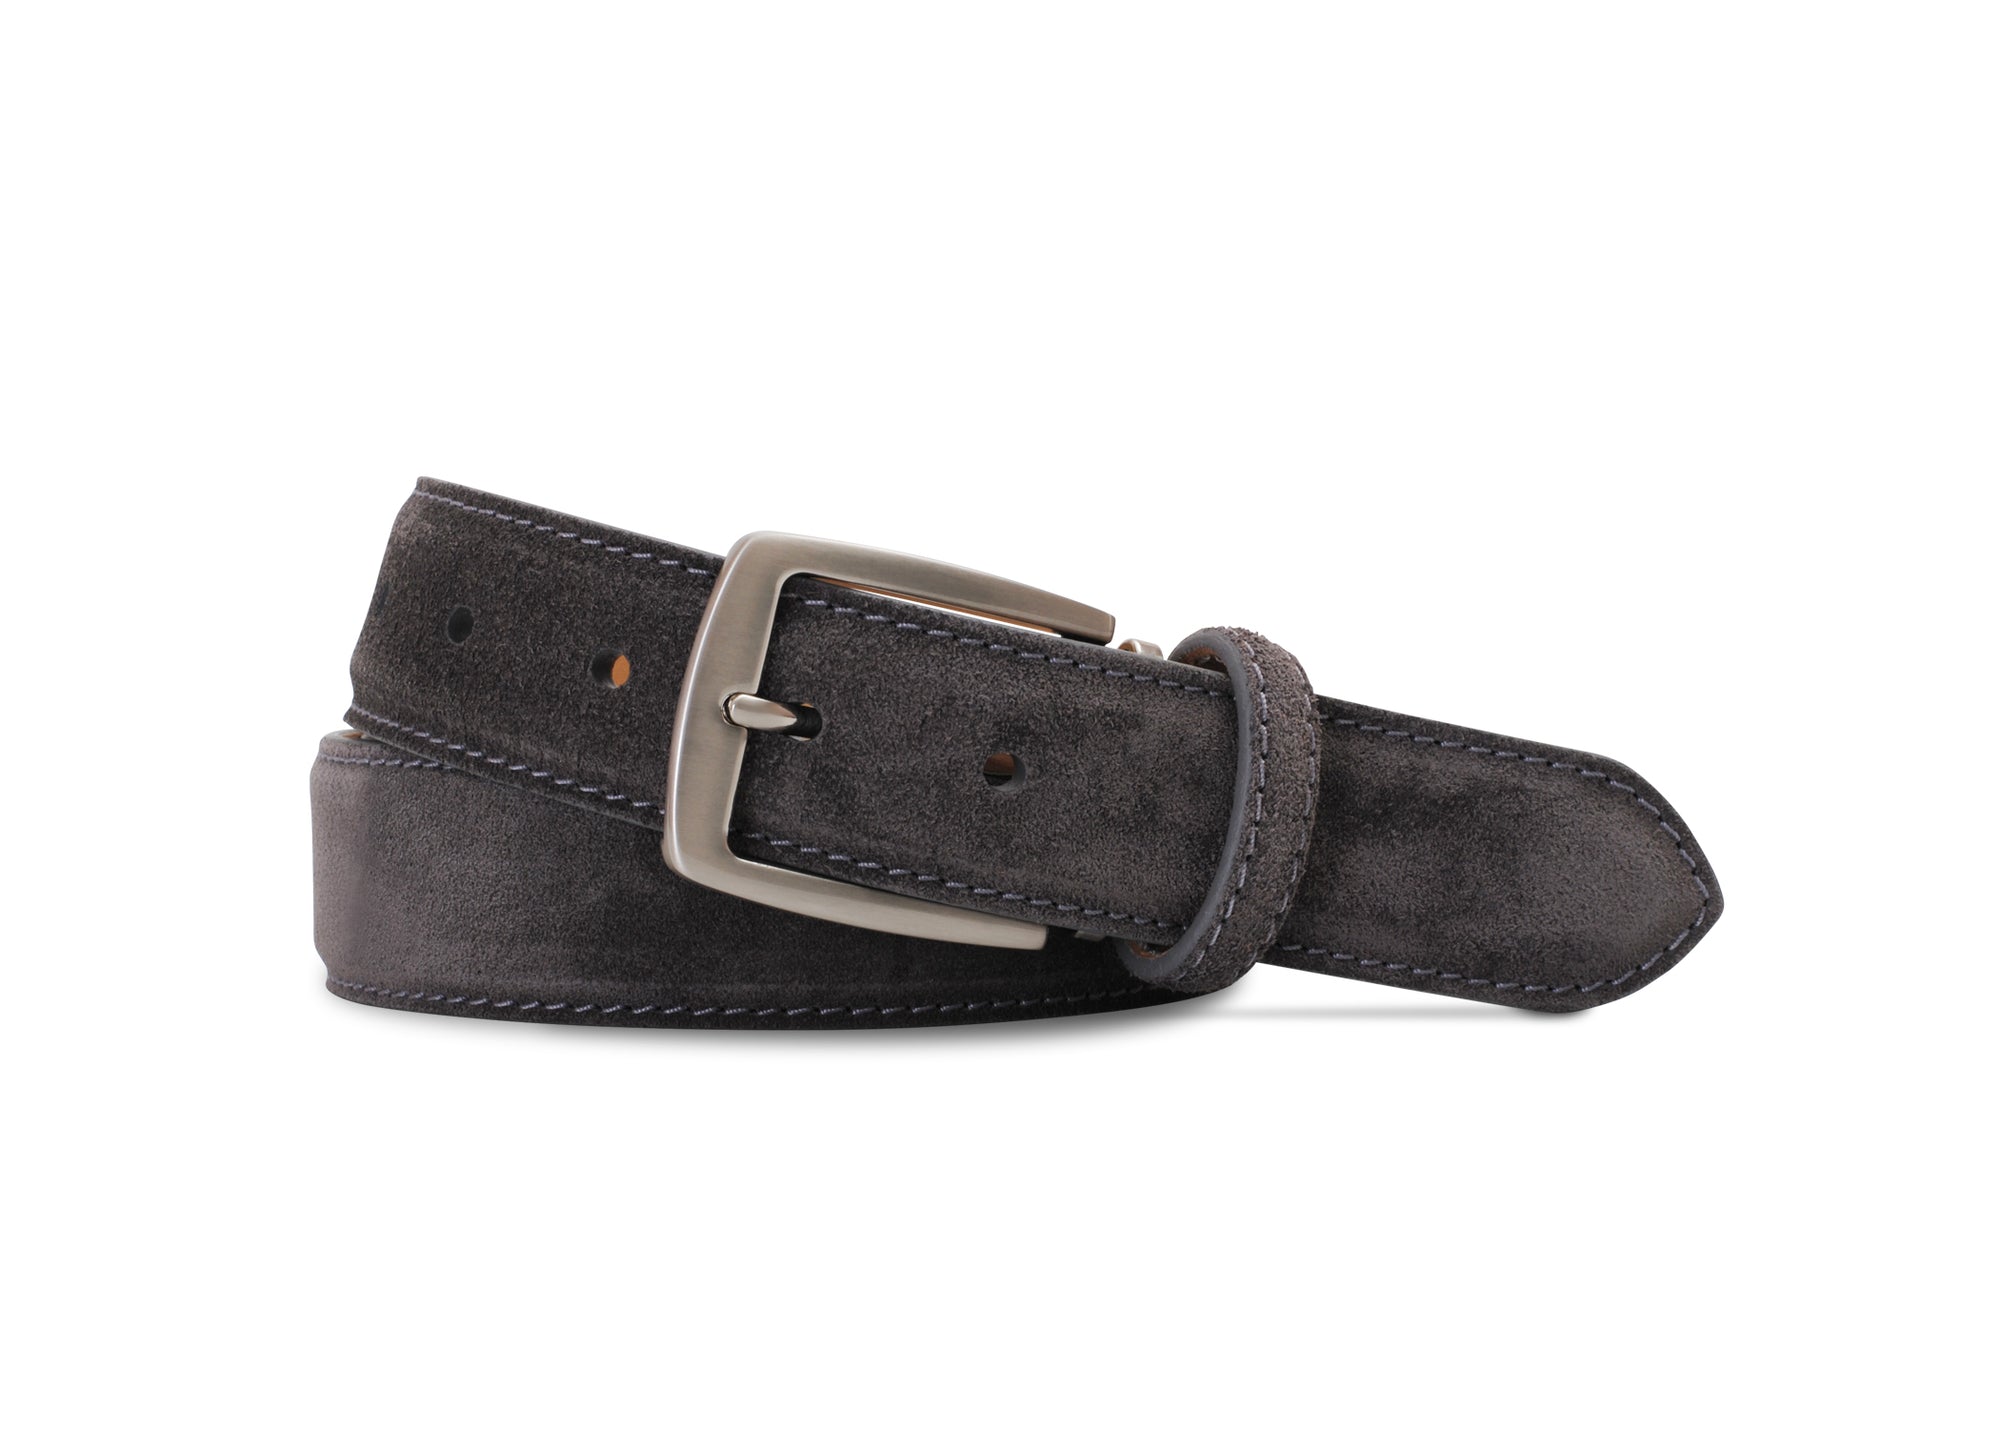 Italian Suede Belt in Charcoal by Brookes & Hyde